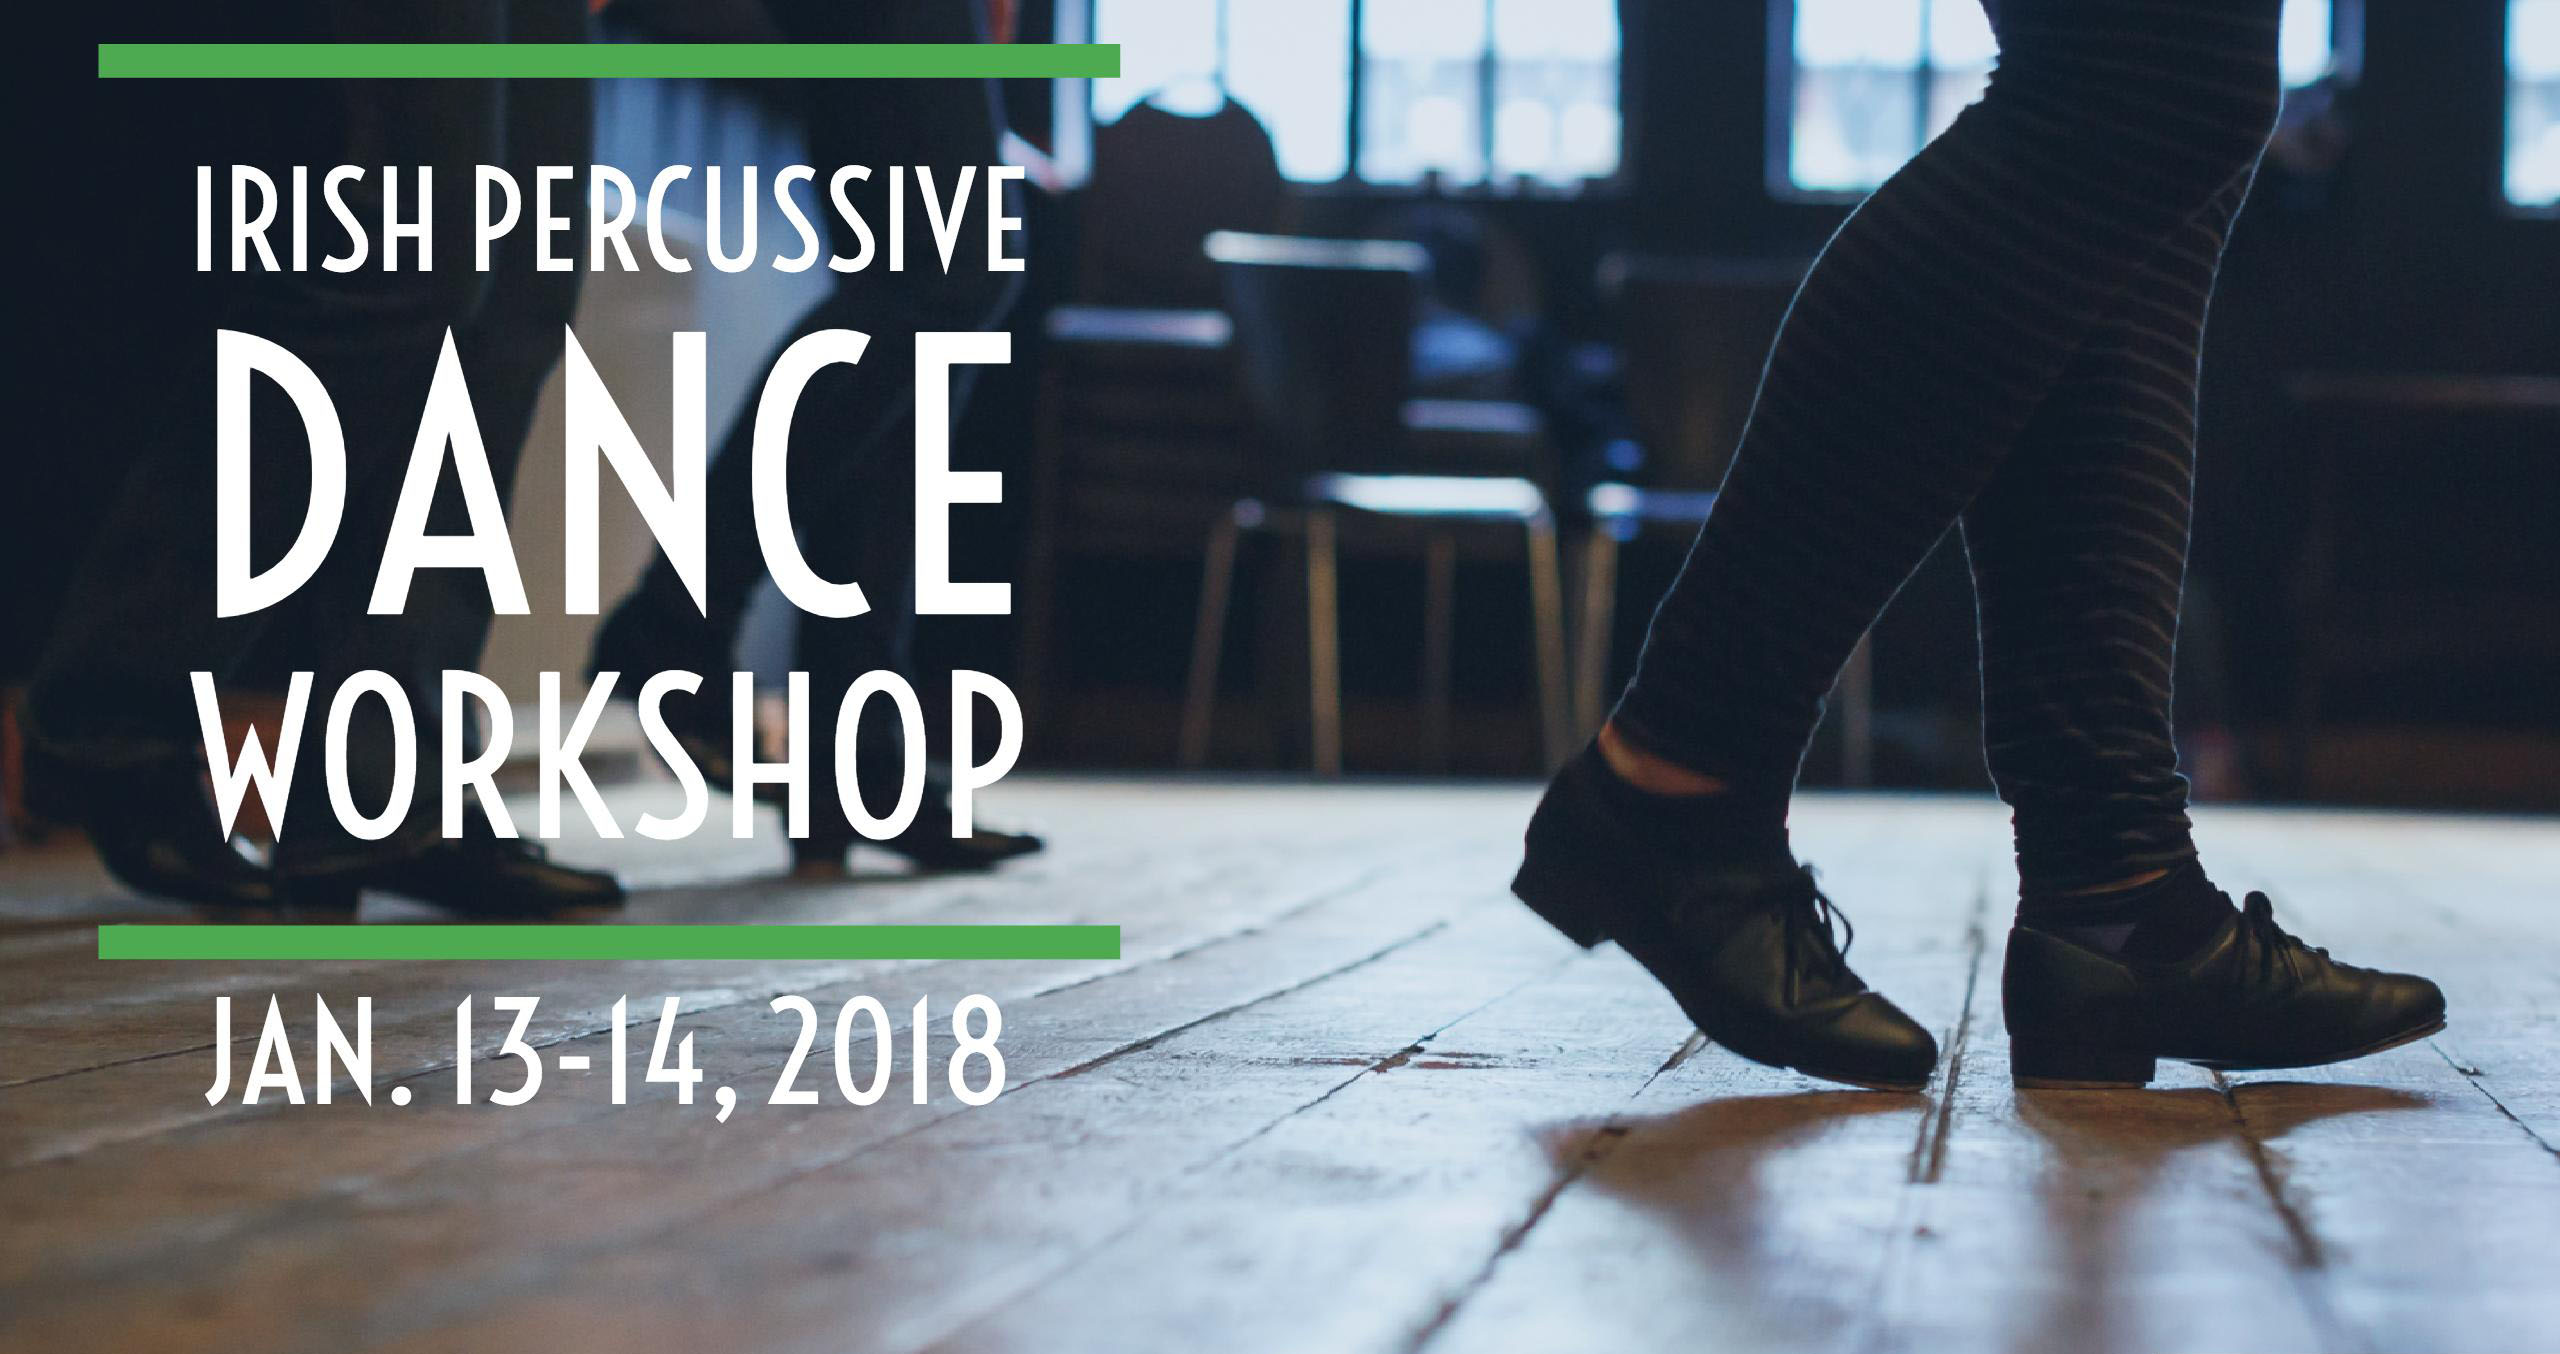 Get your toes tapping with our percussive Irish dance workshop in Lexington